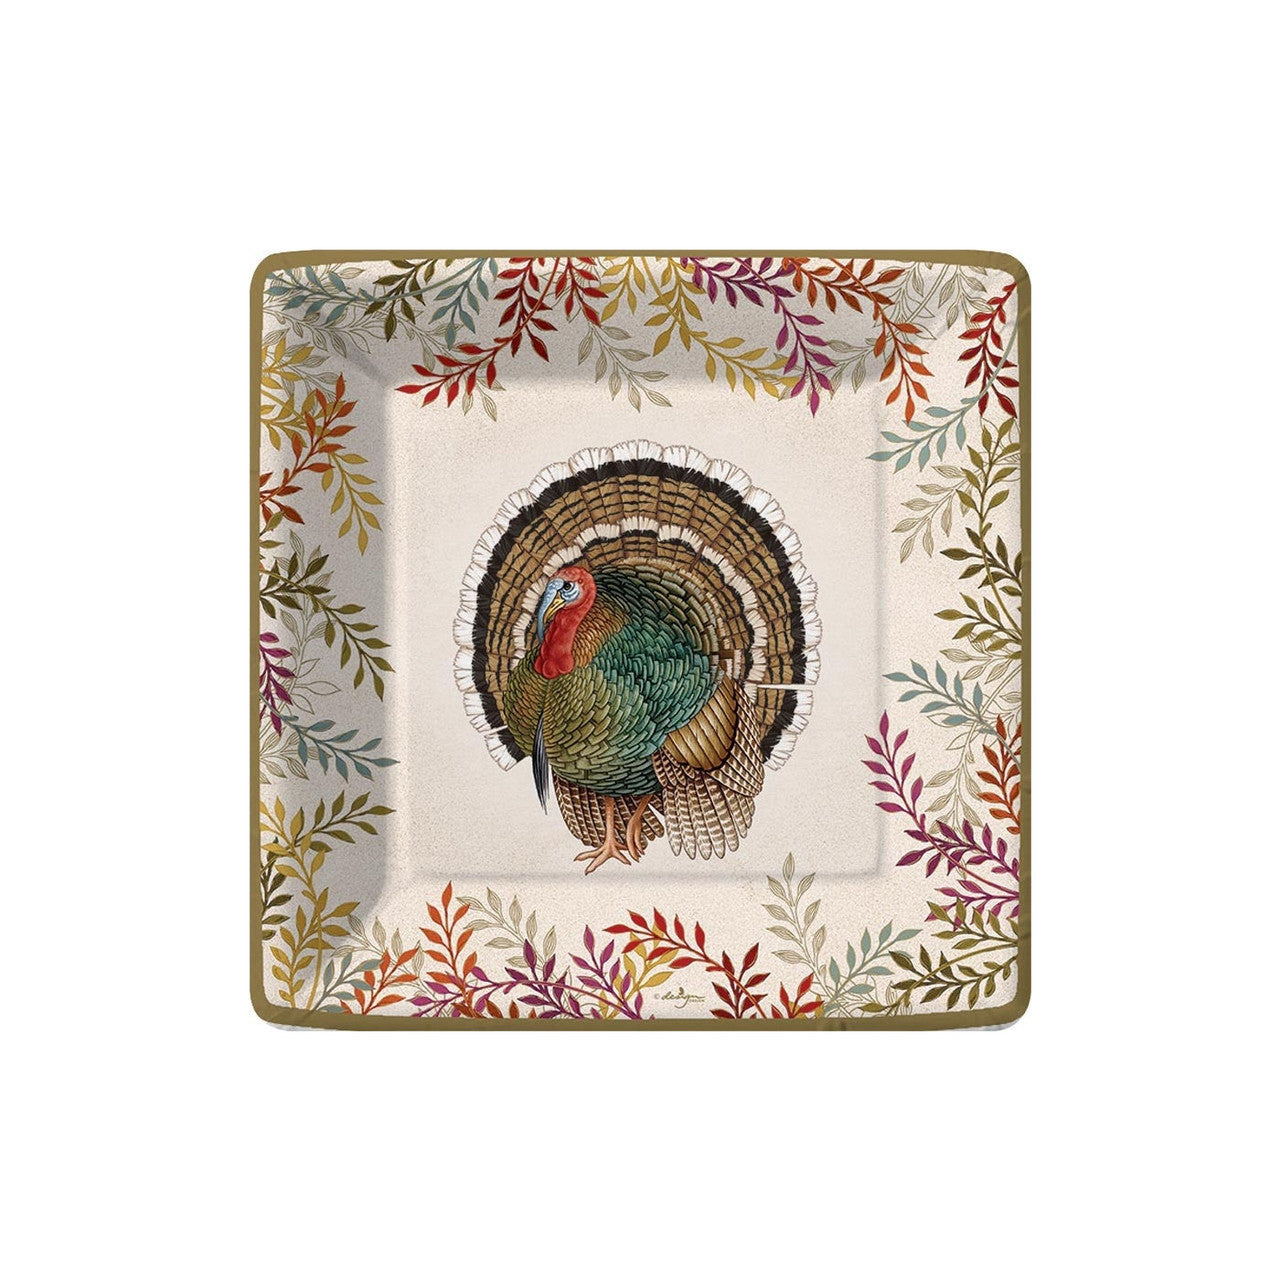 Foliage and Feathers Dinner Plates